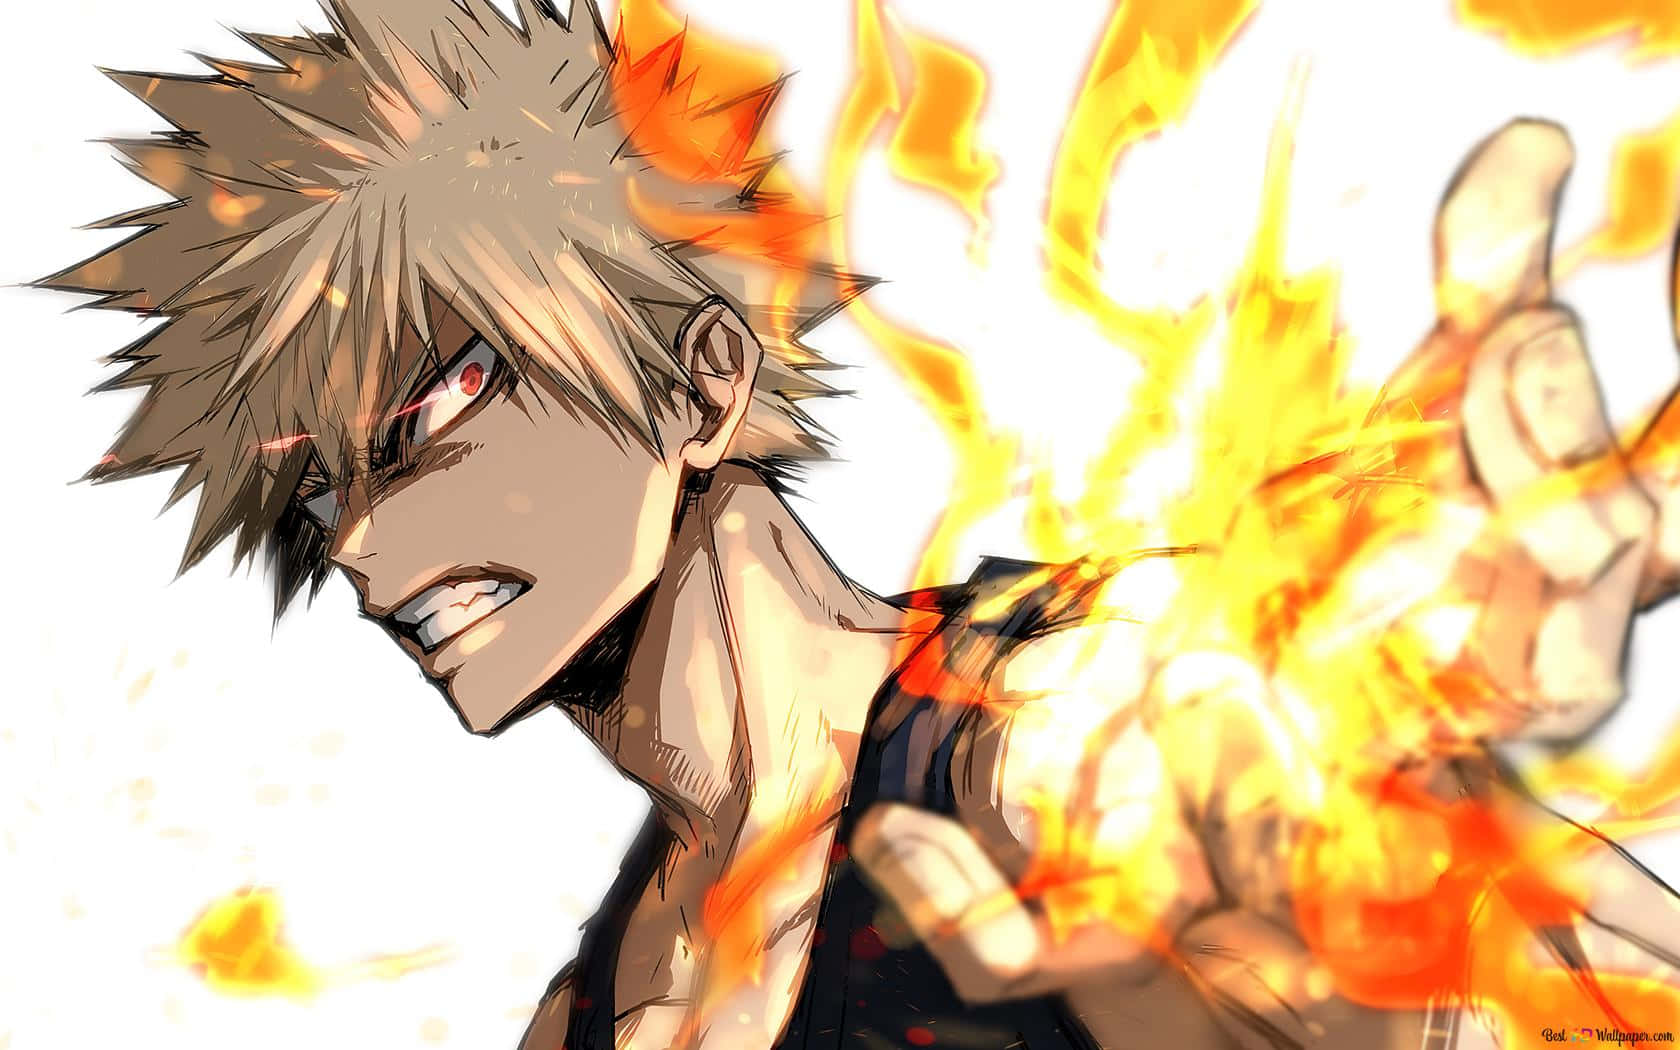 "The fiery Bakugo, a born leader in the world of My Hero Academia." Wallpaper